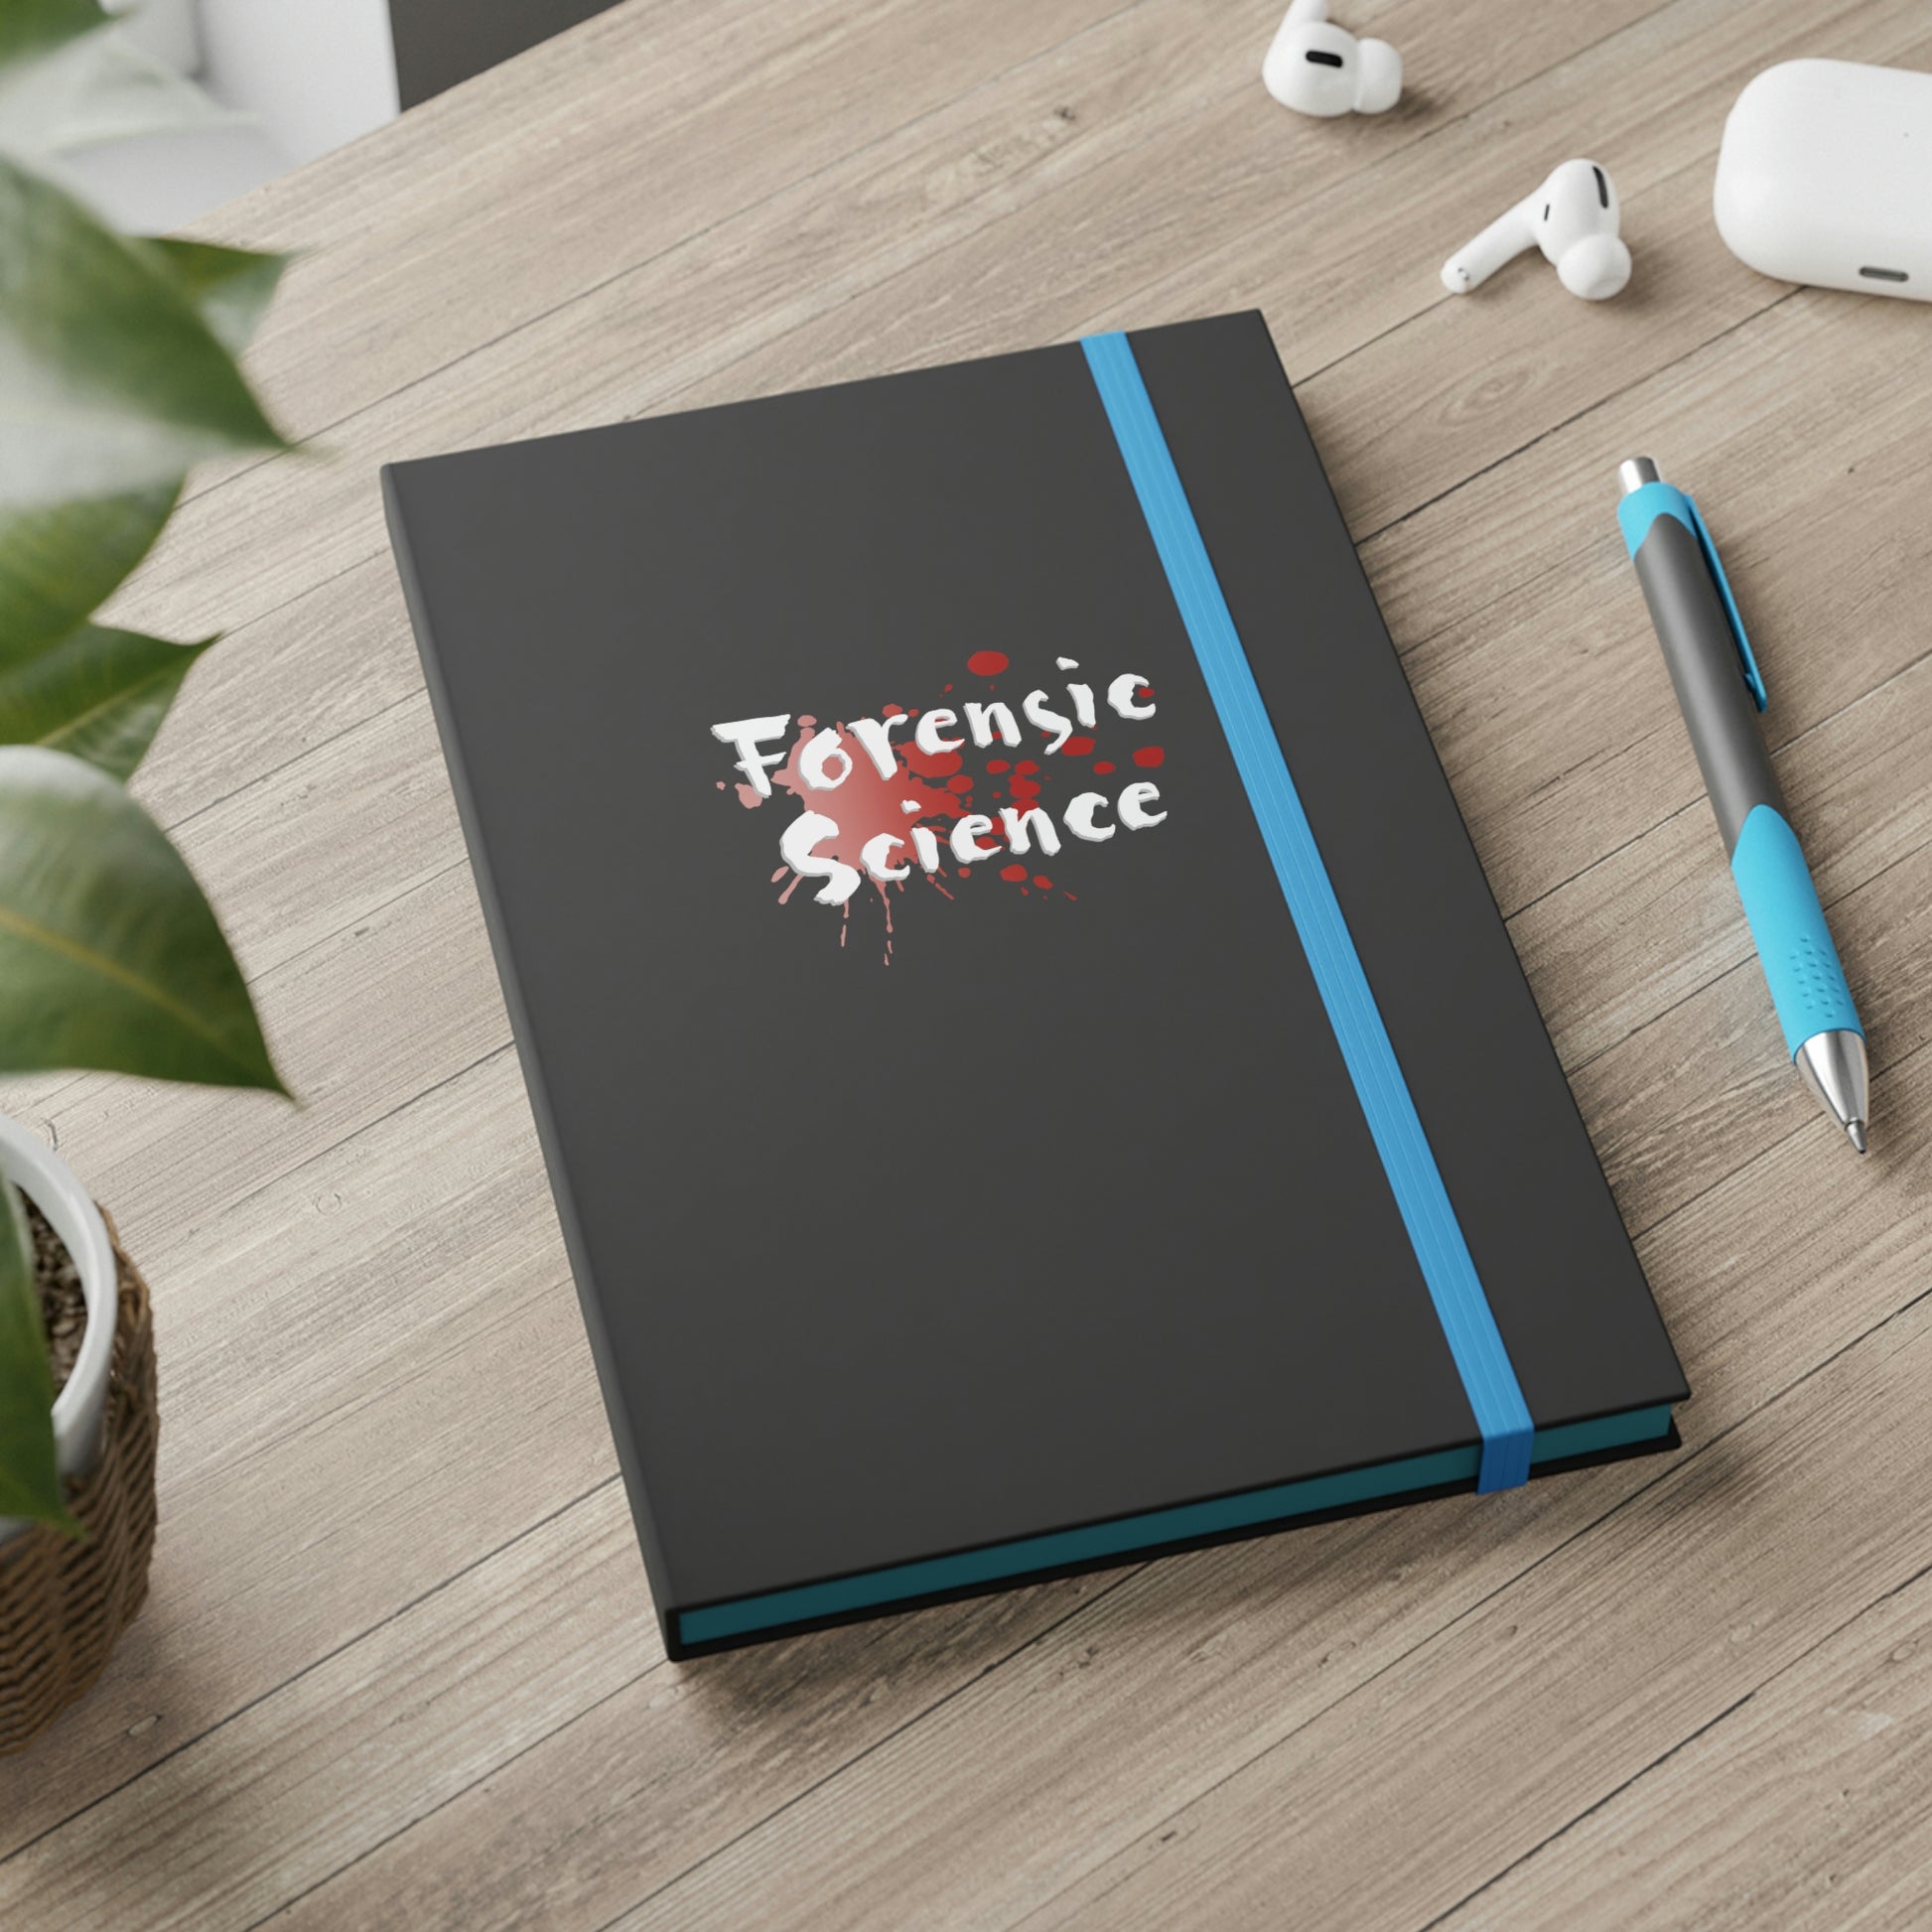 This original design forensic science note book is great for writing down memories, storing secrets, studying, and ticking off to-do lists—these hardcover Journal notebooks get the job done.